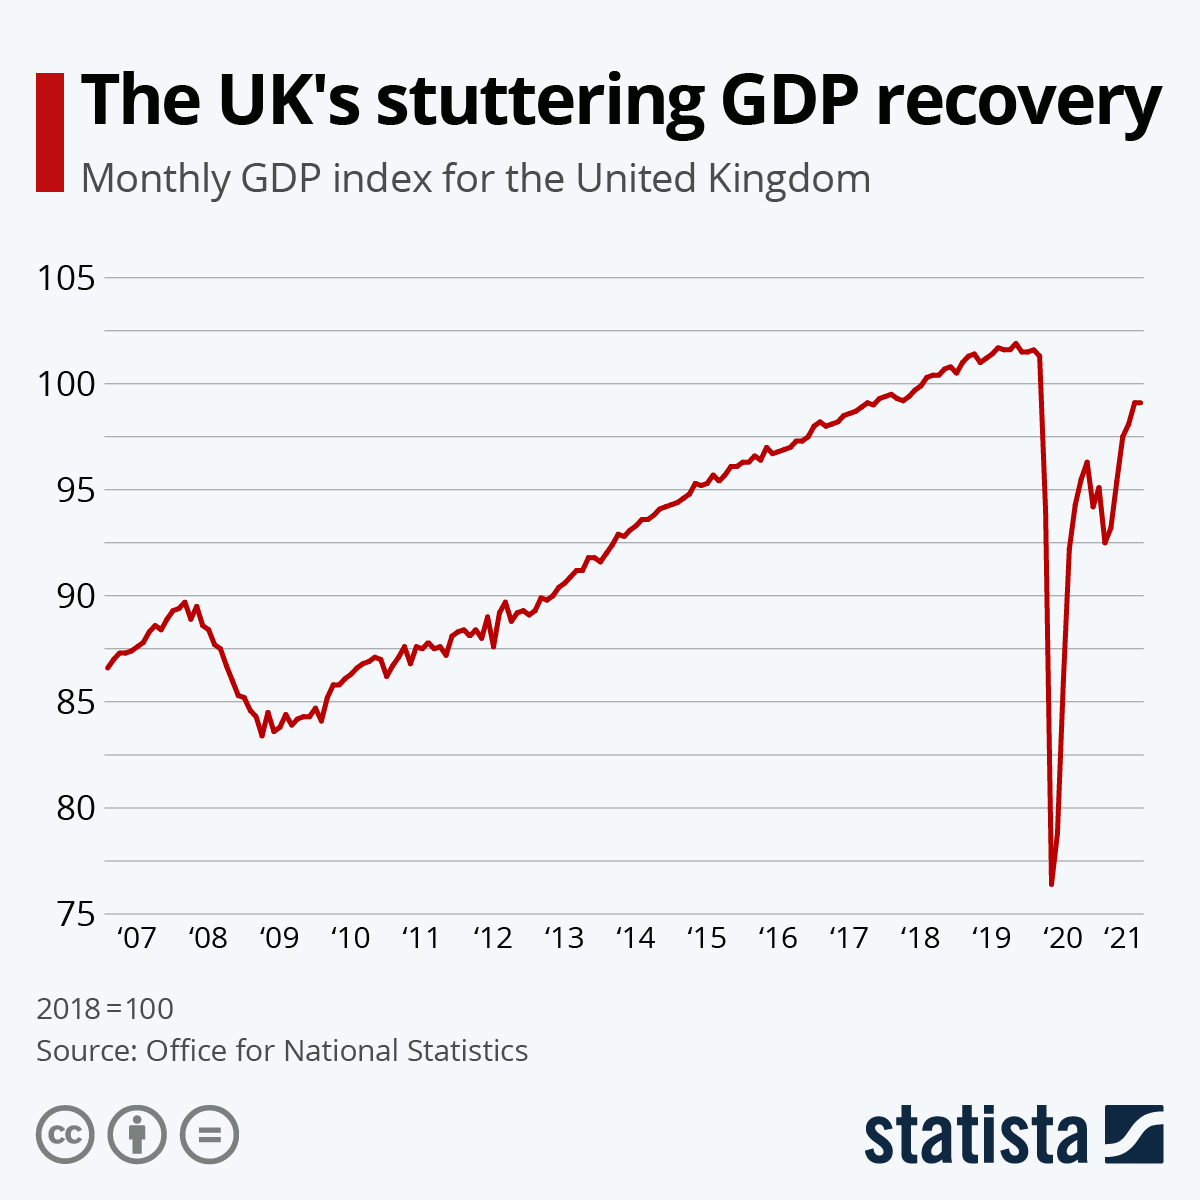 The UK's stuttering GDP recovery